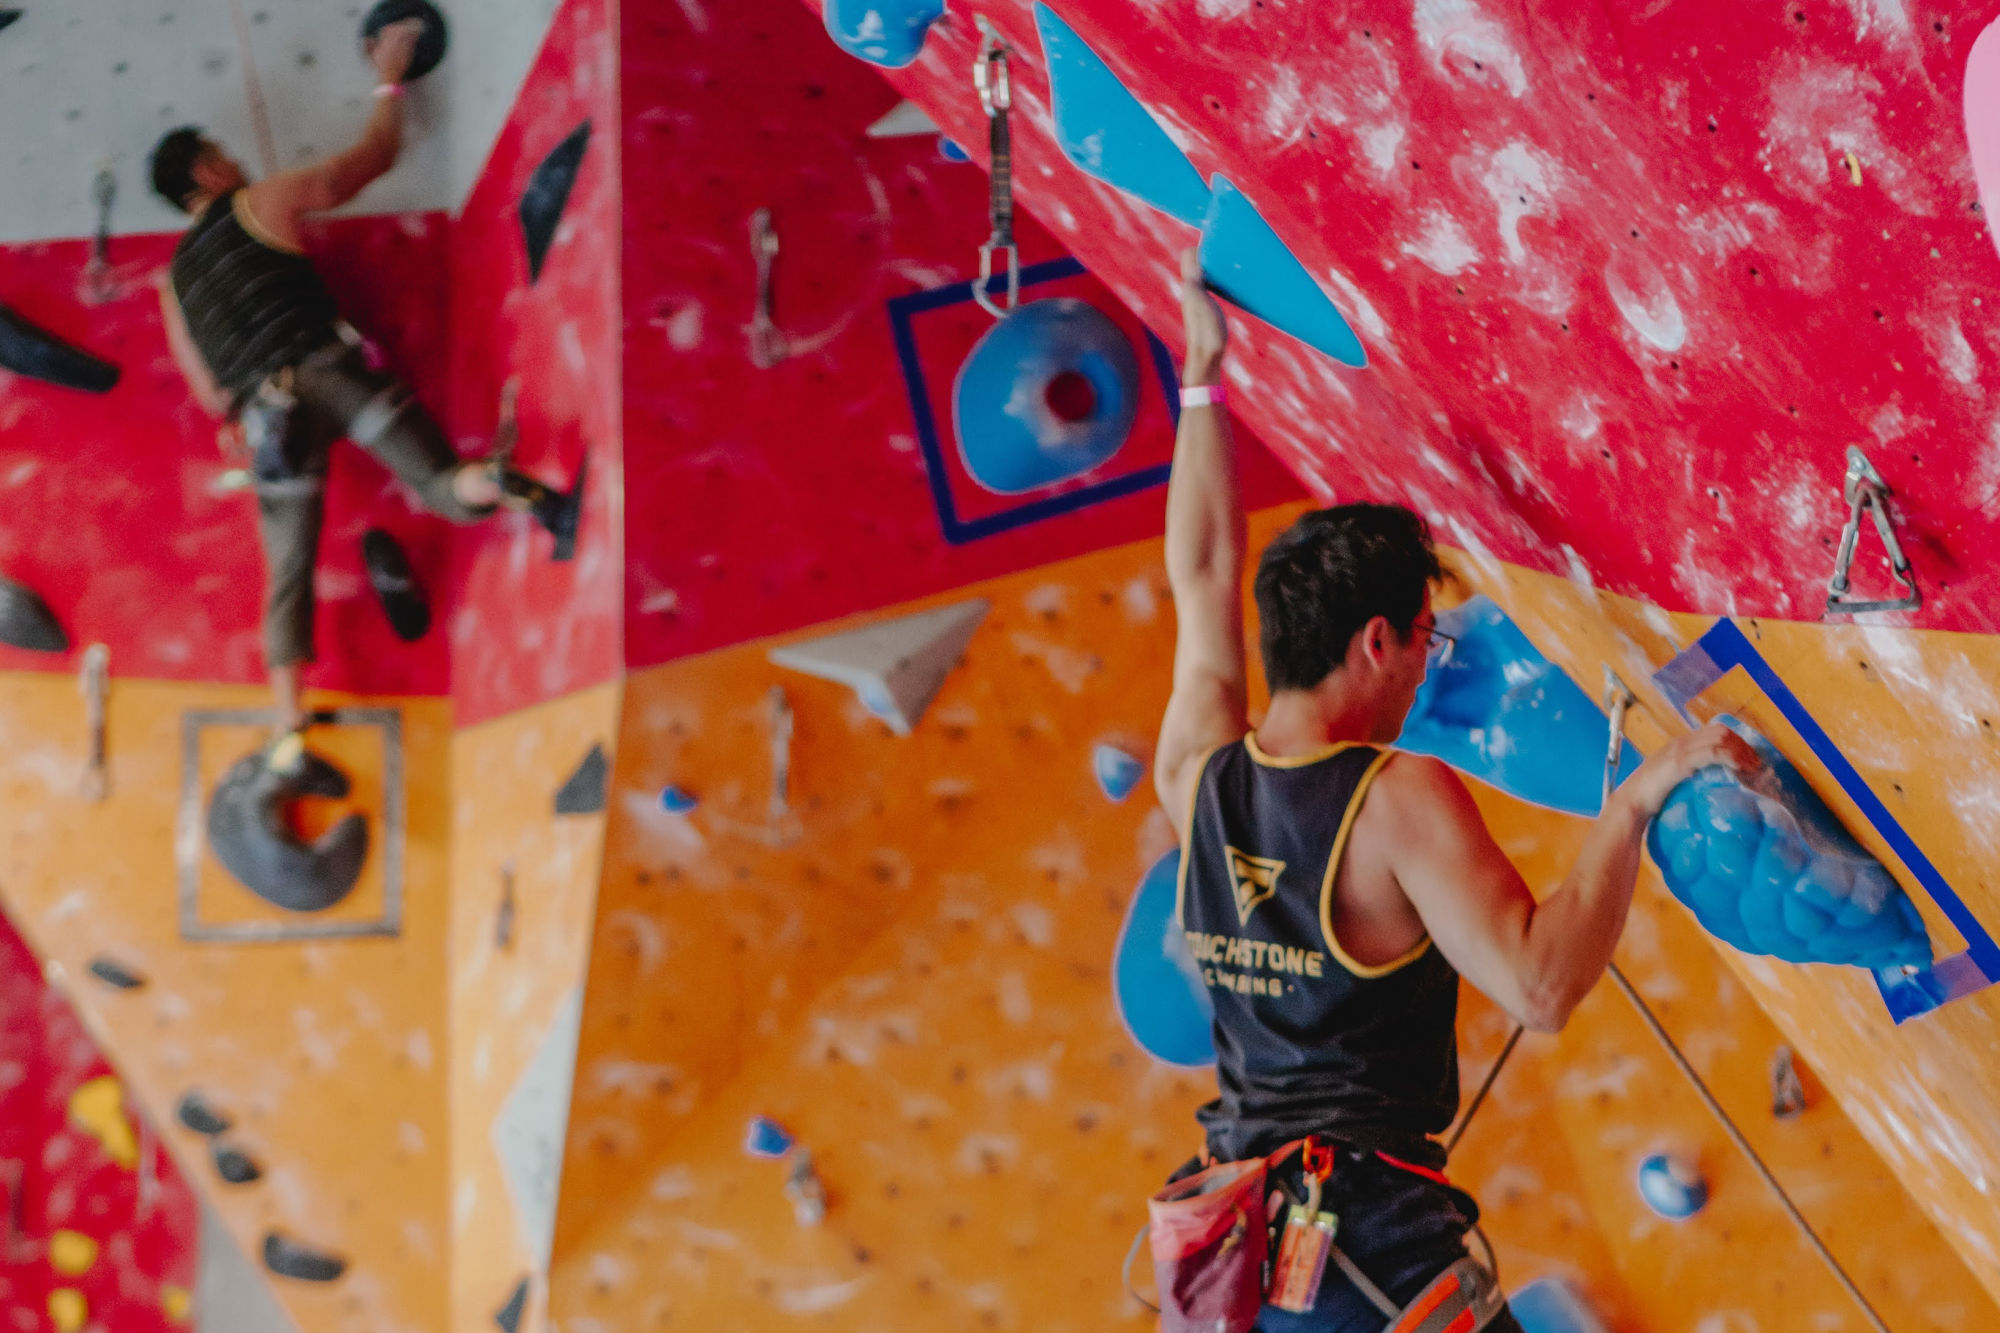 Two men are climbing on a red and orange indoor climbing wall.